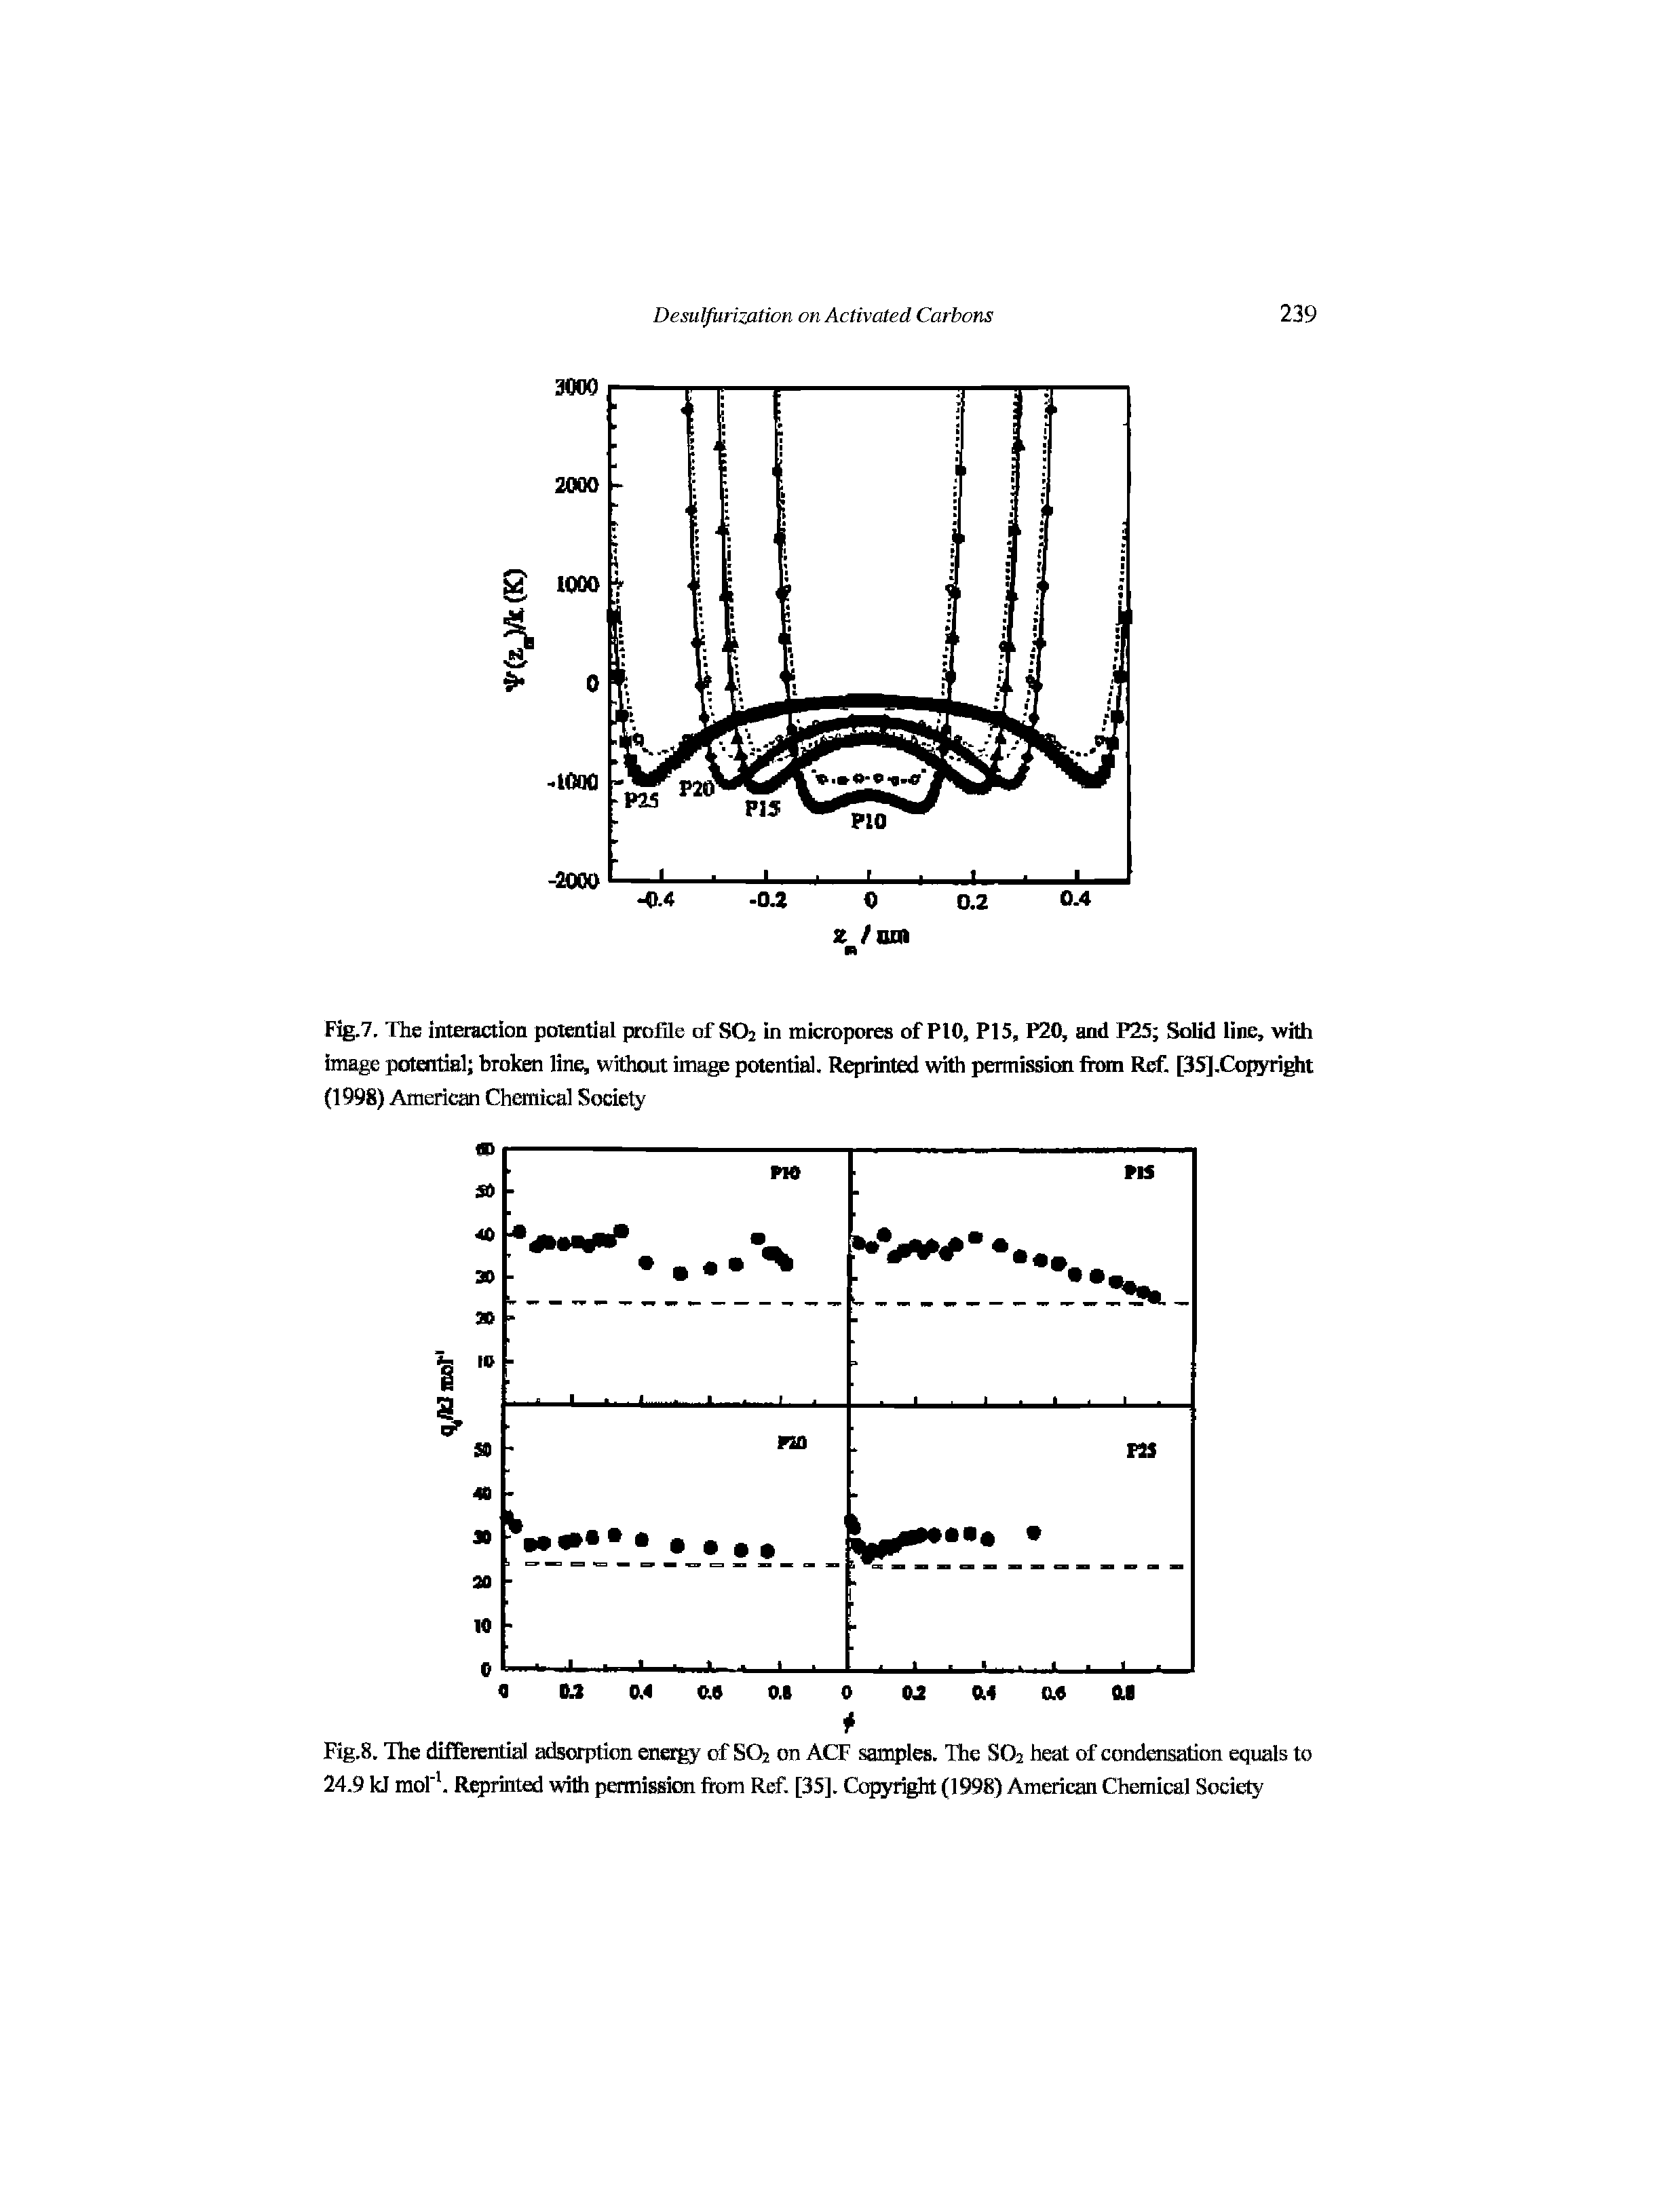 Fig.8. The differential adsorption energy of SO2 on ACF samples. The SO2 heat of condensation equals to 24.9 kJ mof. Reprinted with permission from Ref. [35]. Copyright (1998) American Chemical Society...